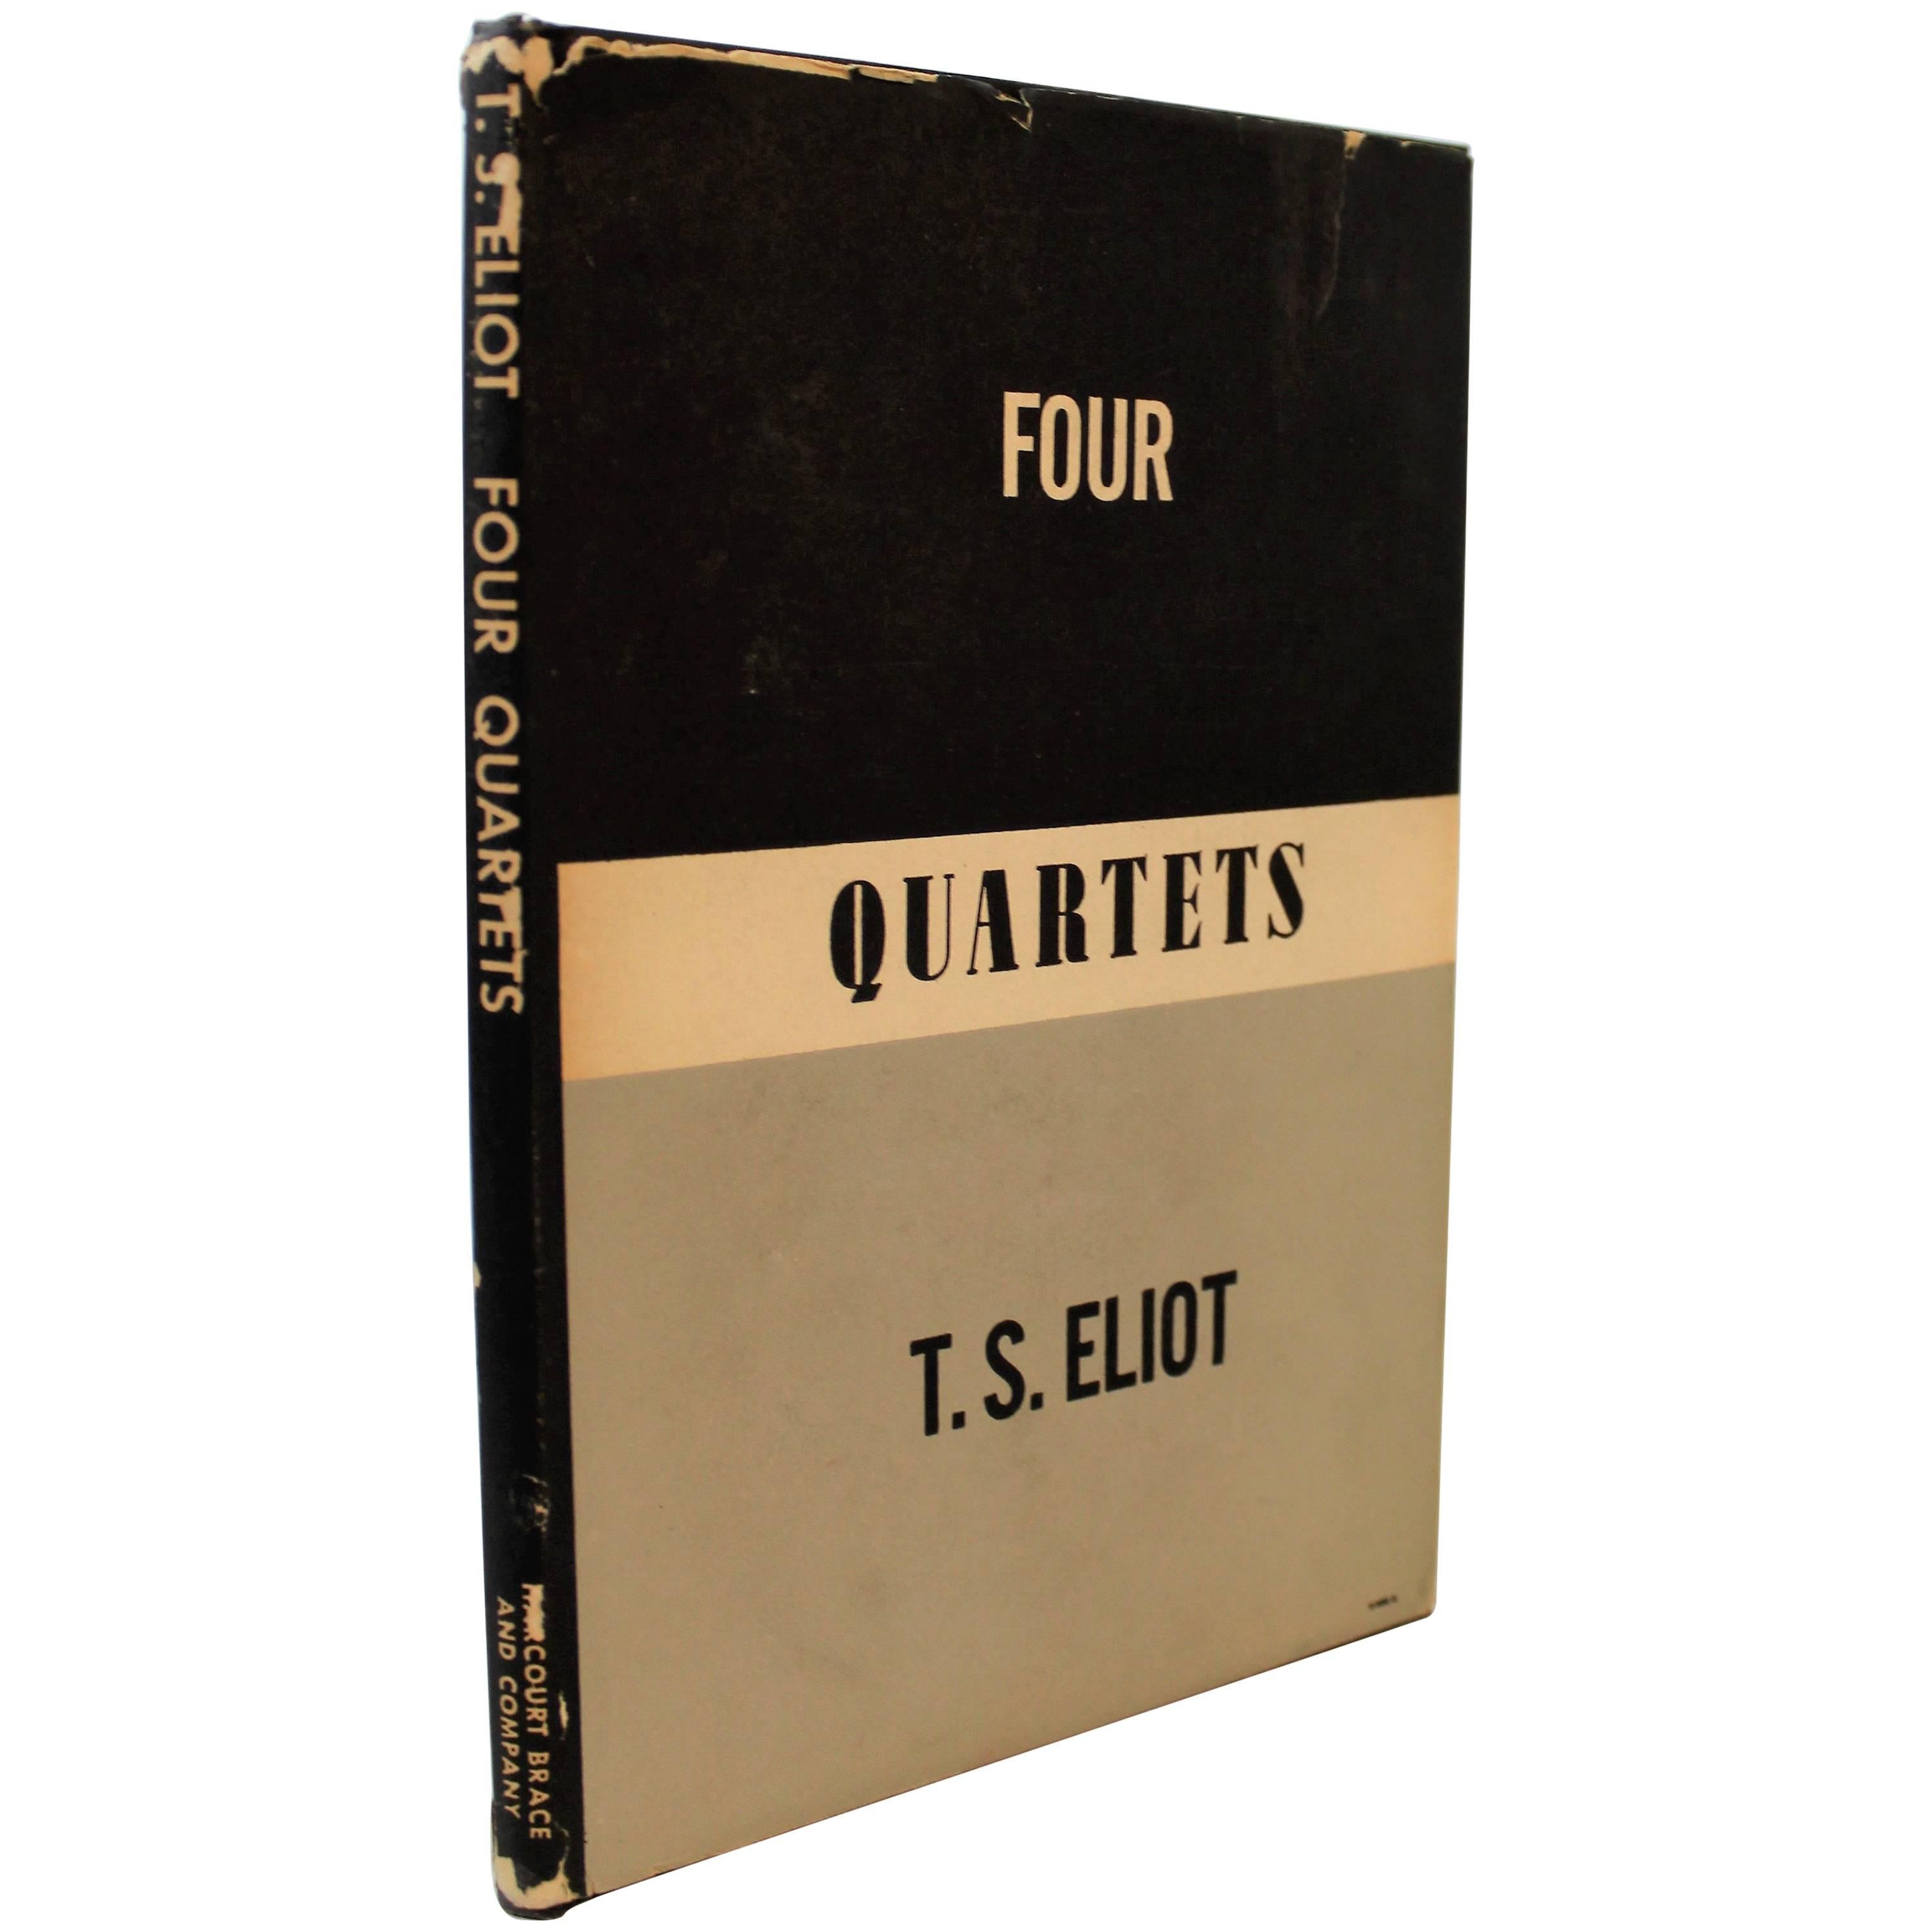 'Four Quartets' First Edition Book by T.S. Eliot For Sale